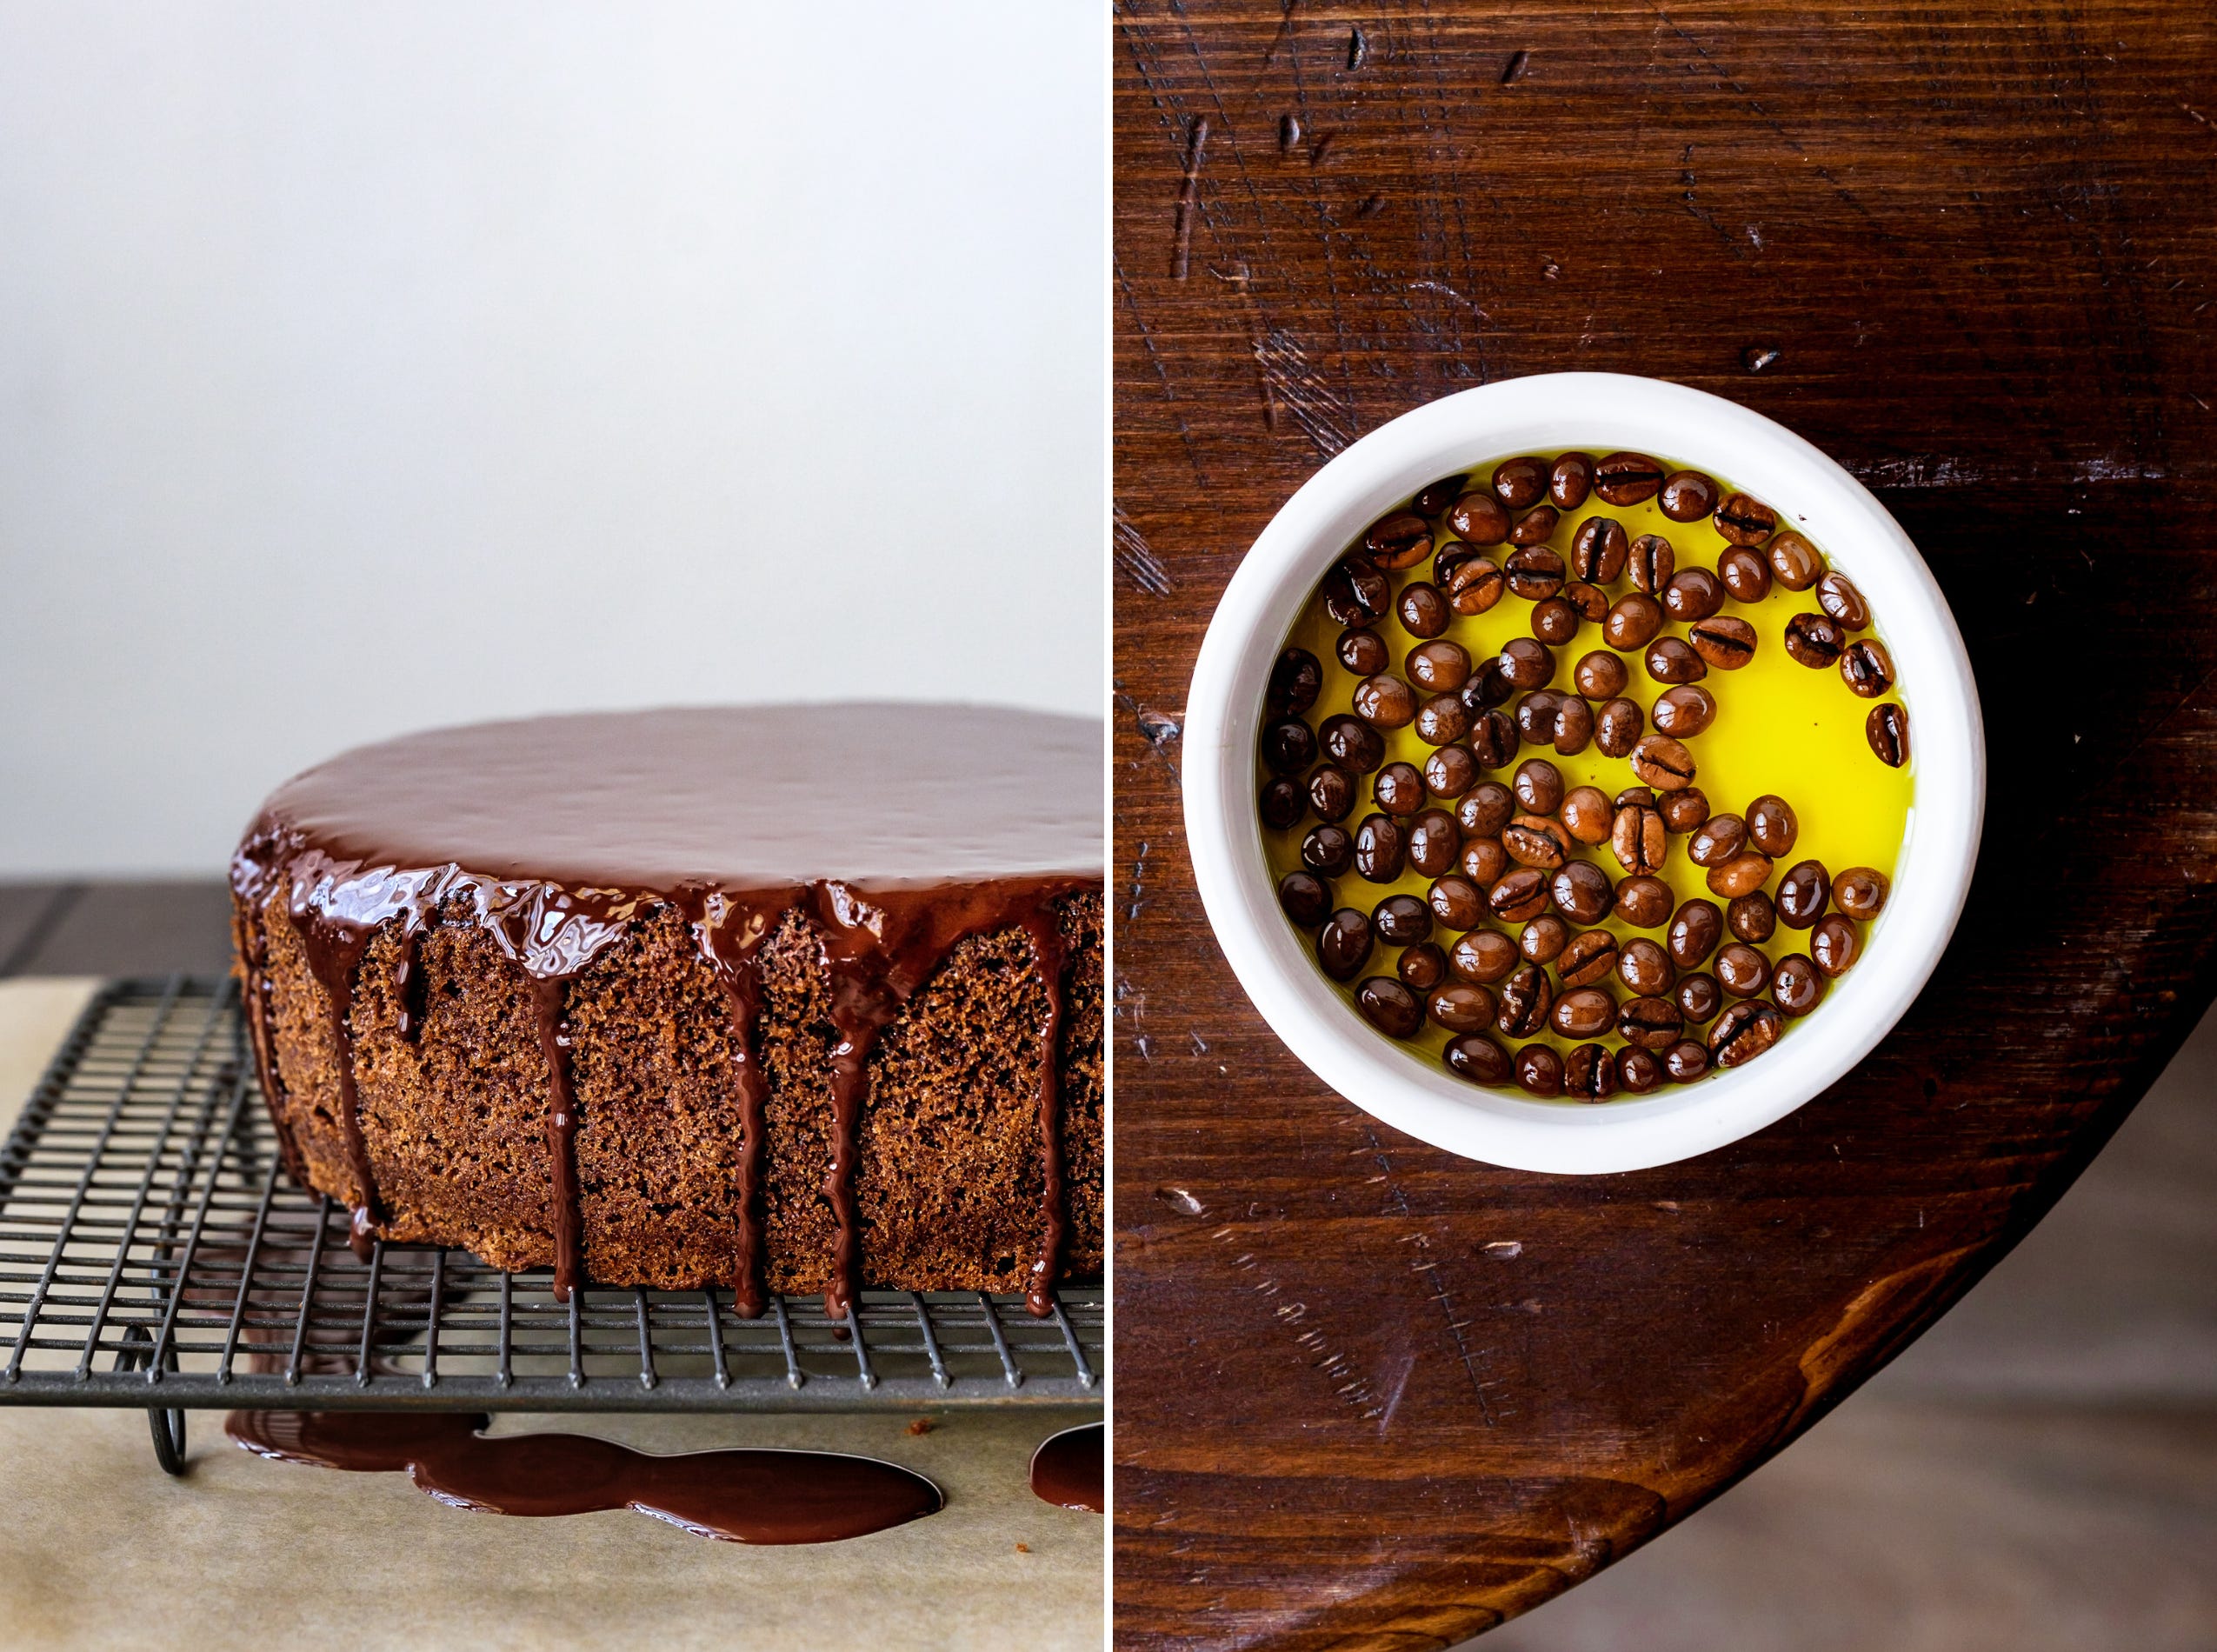 Can I use extra virgin olive oil for cake?